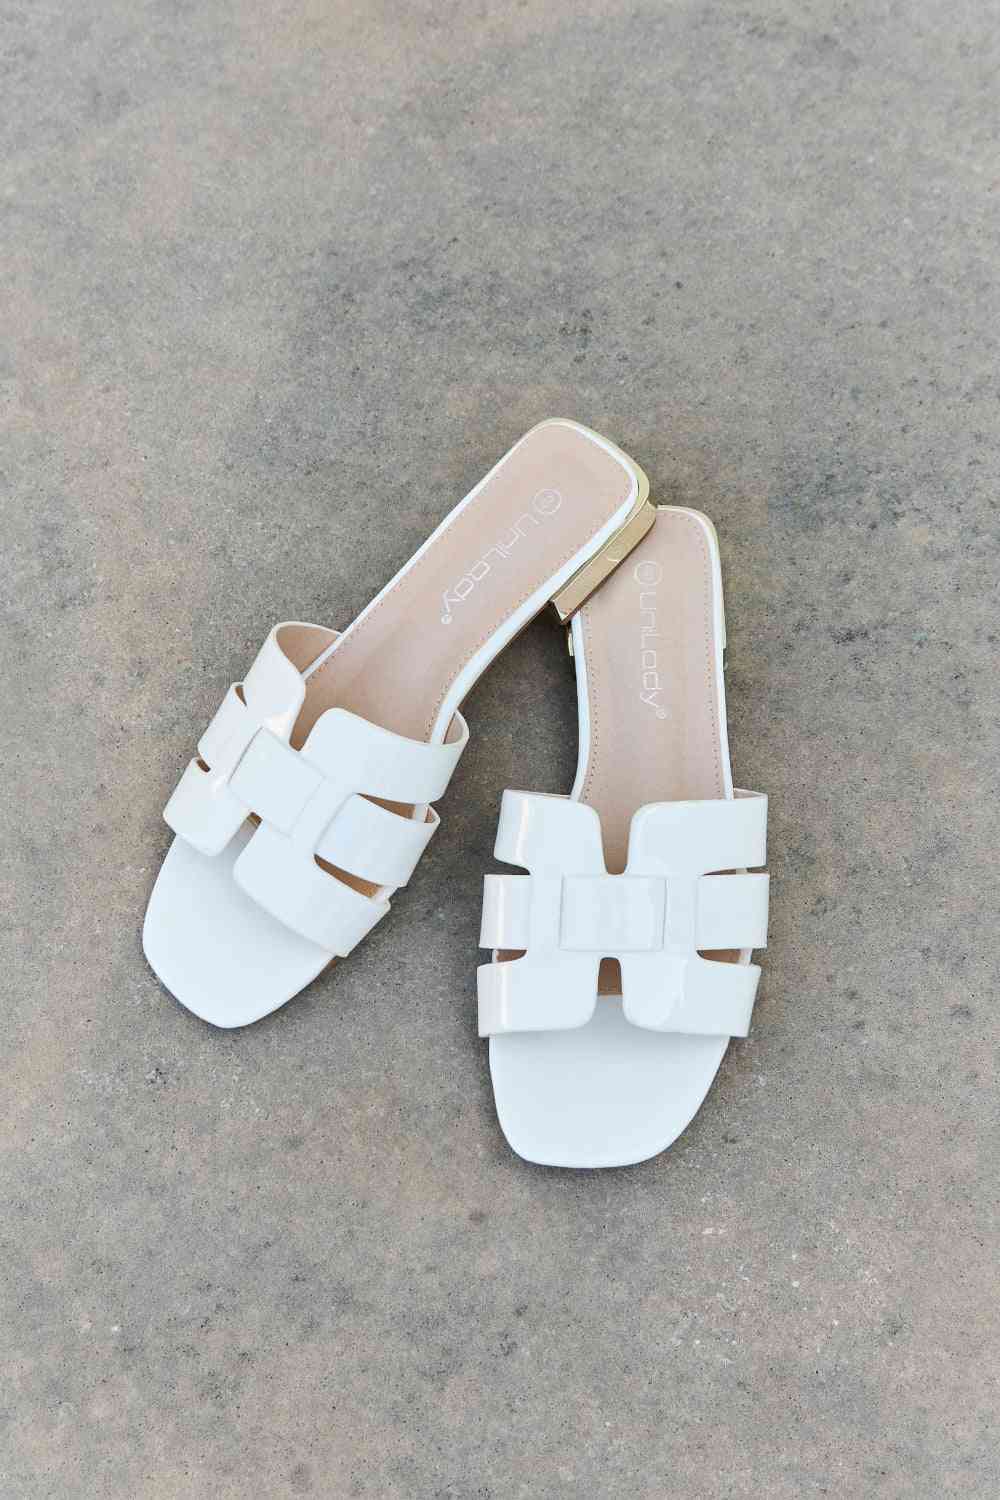 Weeboo Walk It Out Slide Sandals in Icy White | Sugarz Chique Boutique